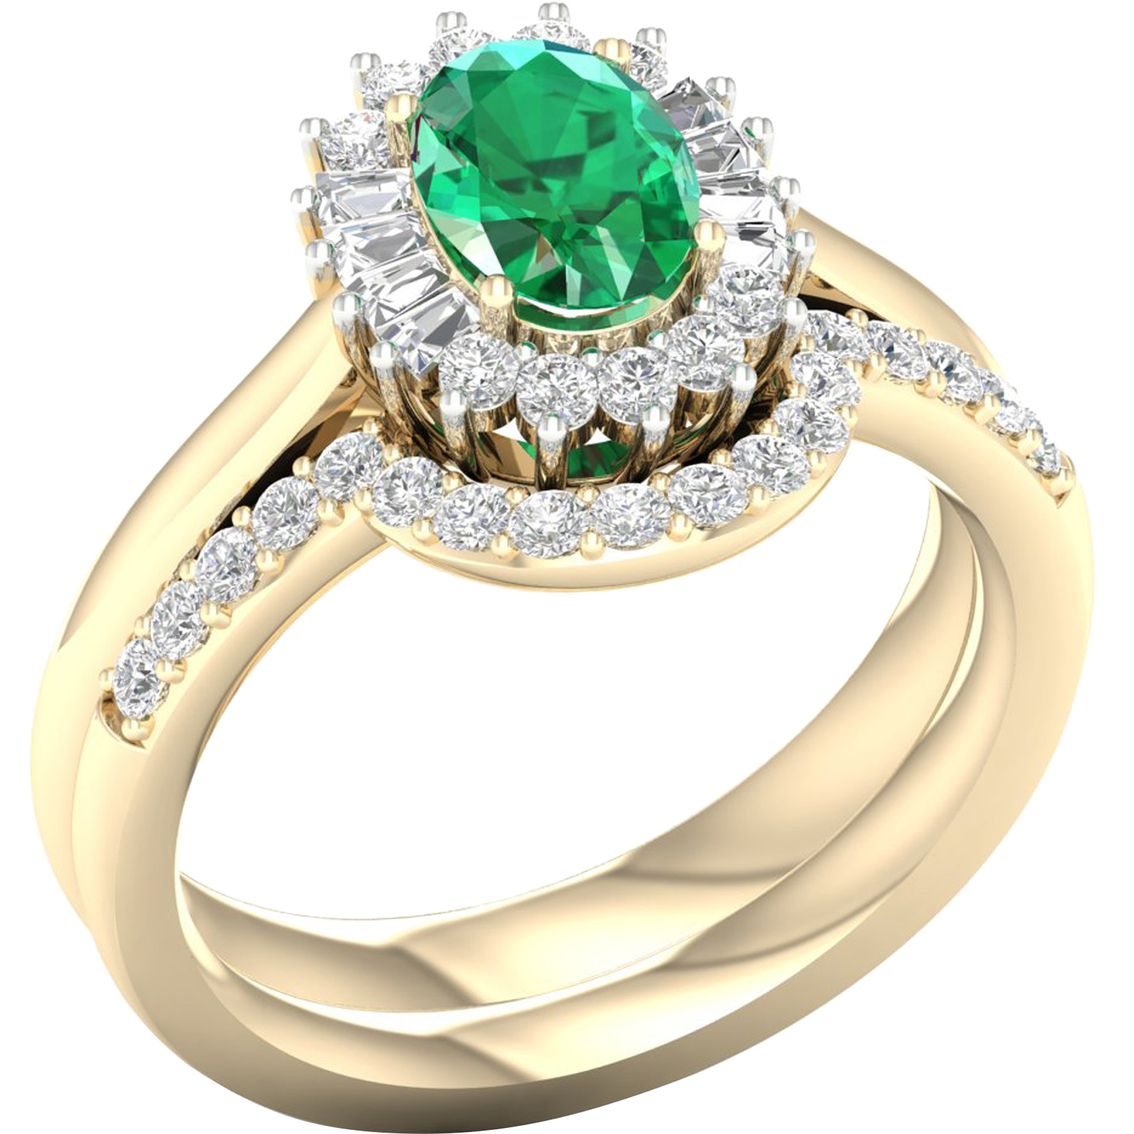 Color Bouquets by Lily 10K Gold 3/8 CTW Diamond and Genuine Emerald Bridal Set - Image 2 of 4